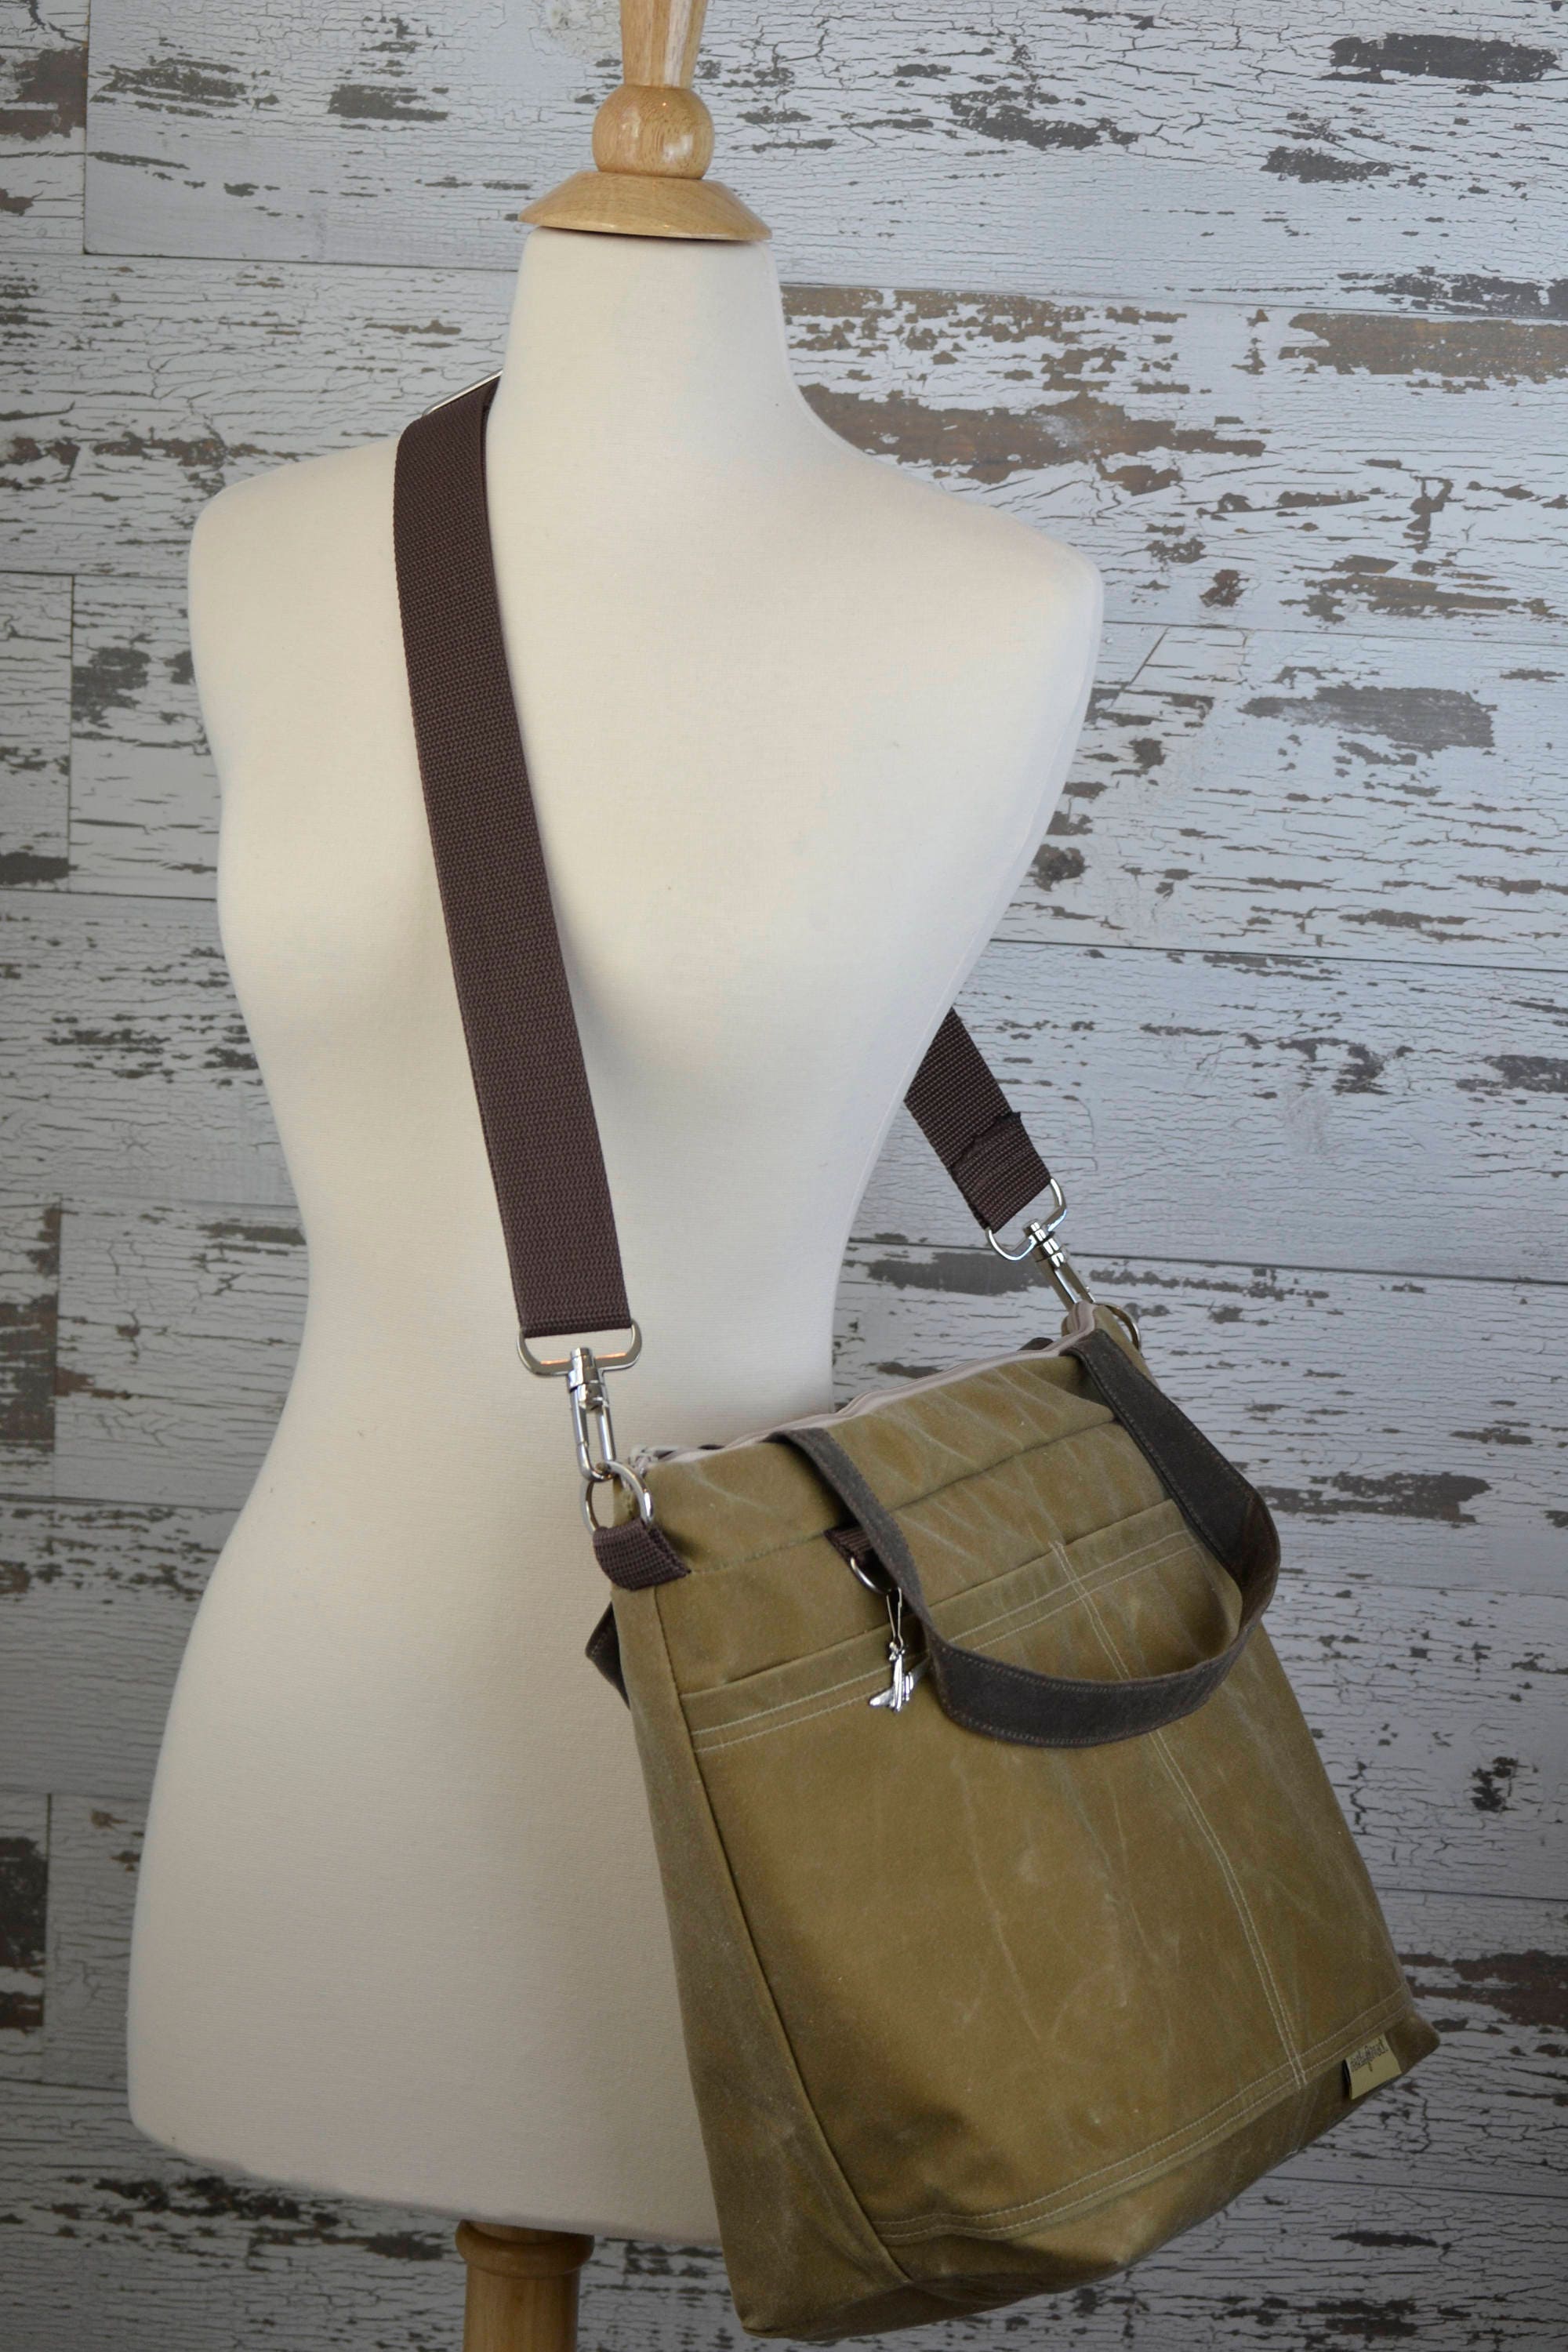 Camera Bag Waxed Canvas waterproof Tote / cross body made in